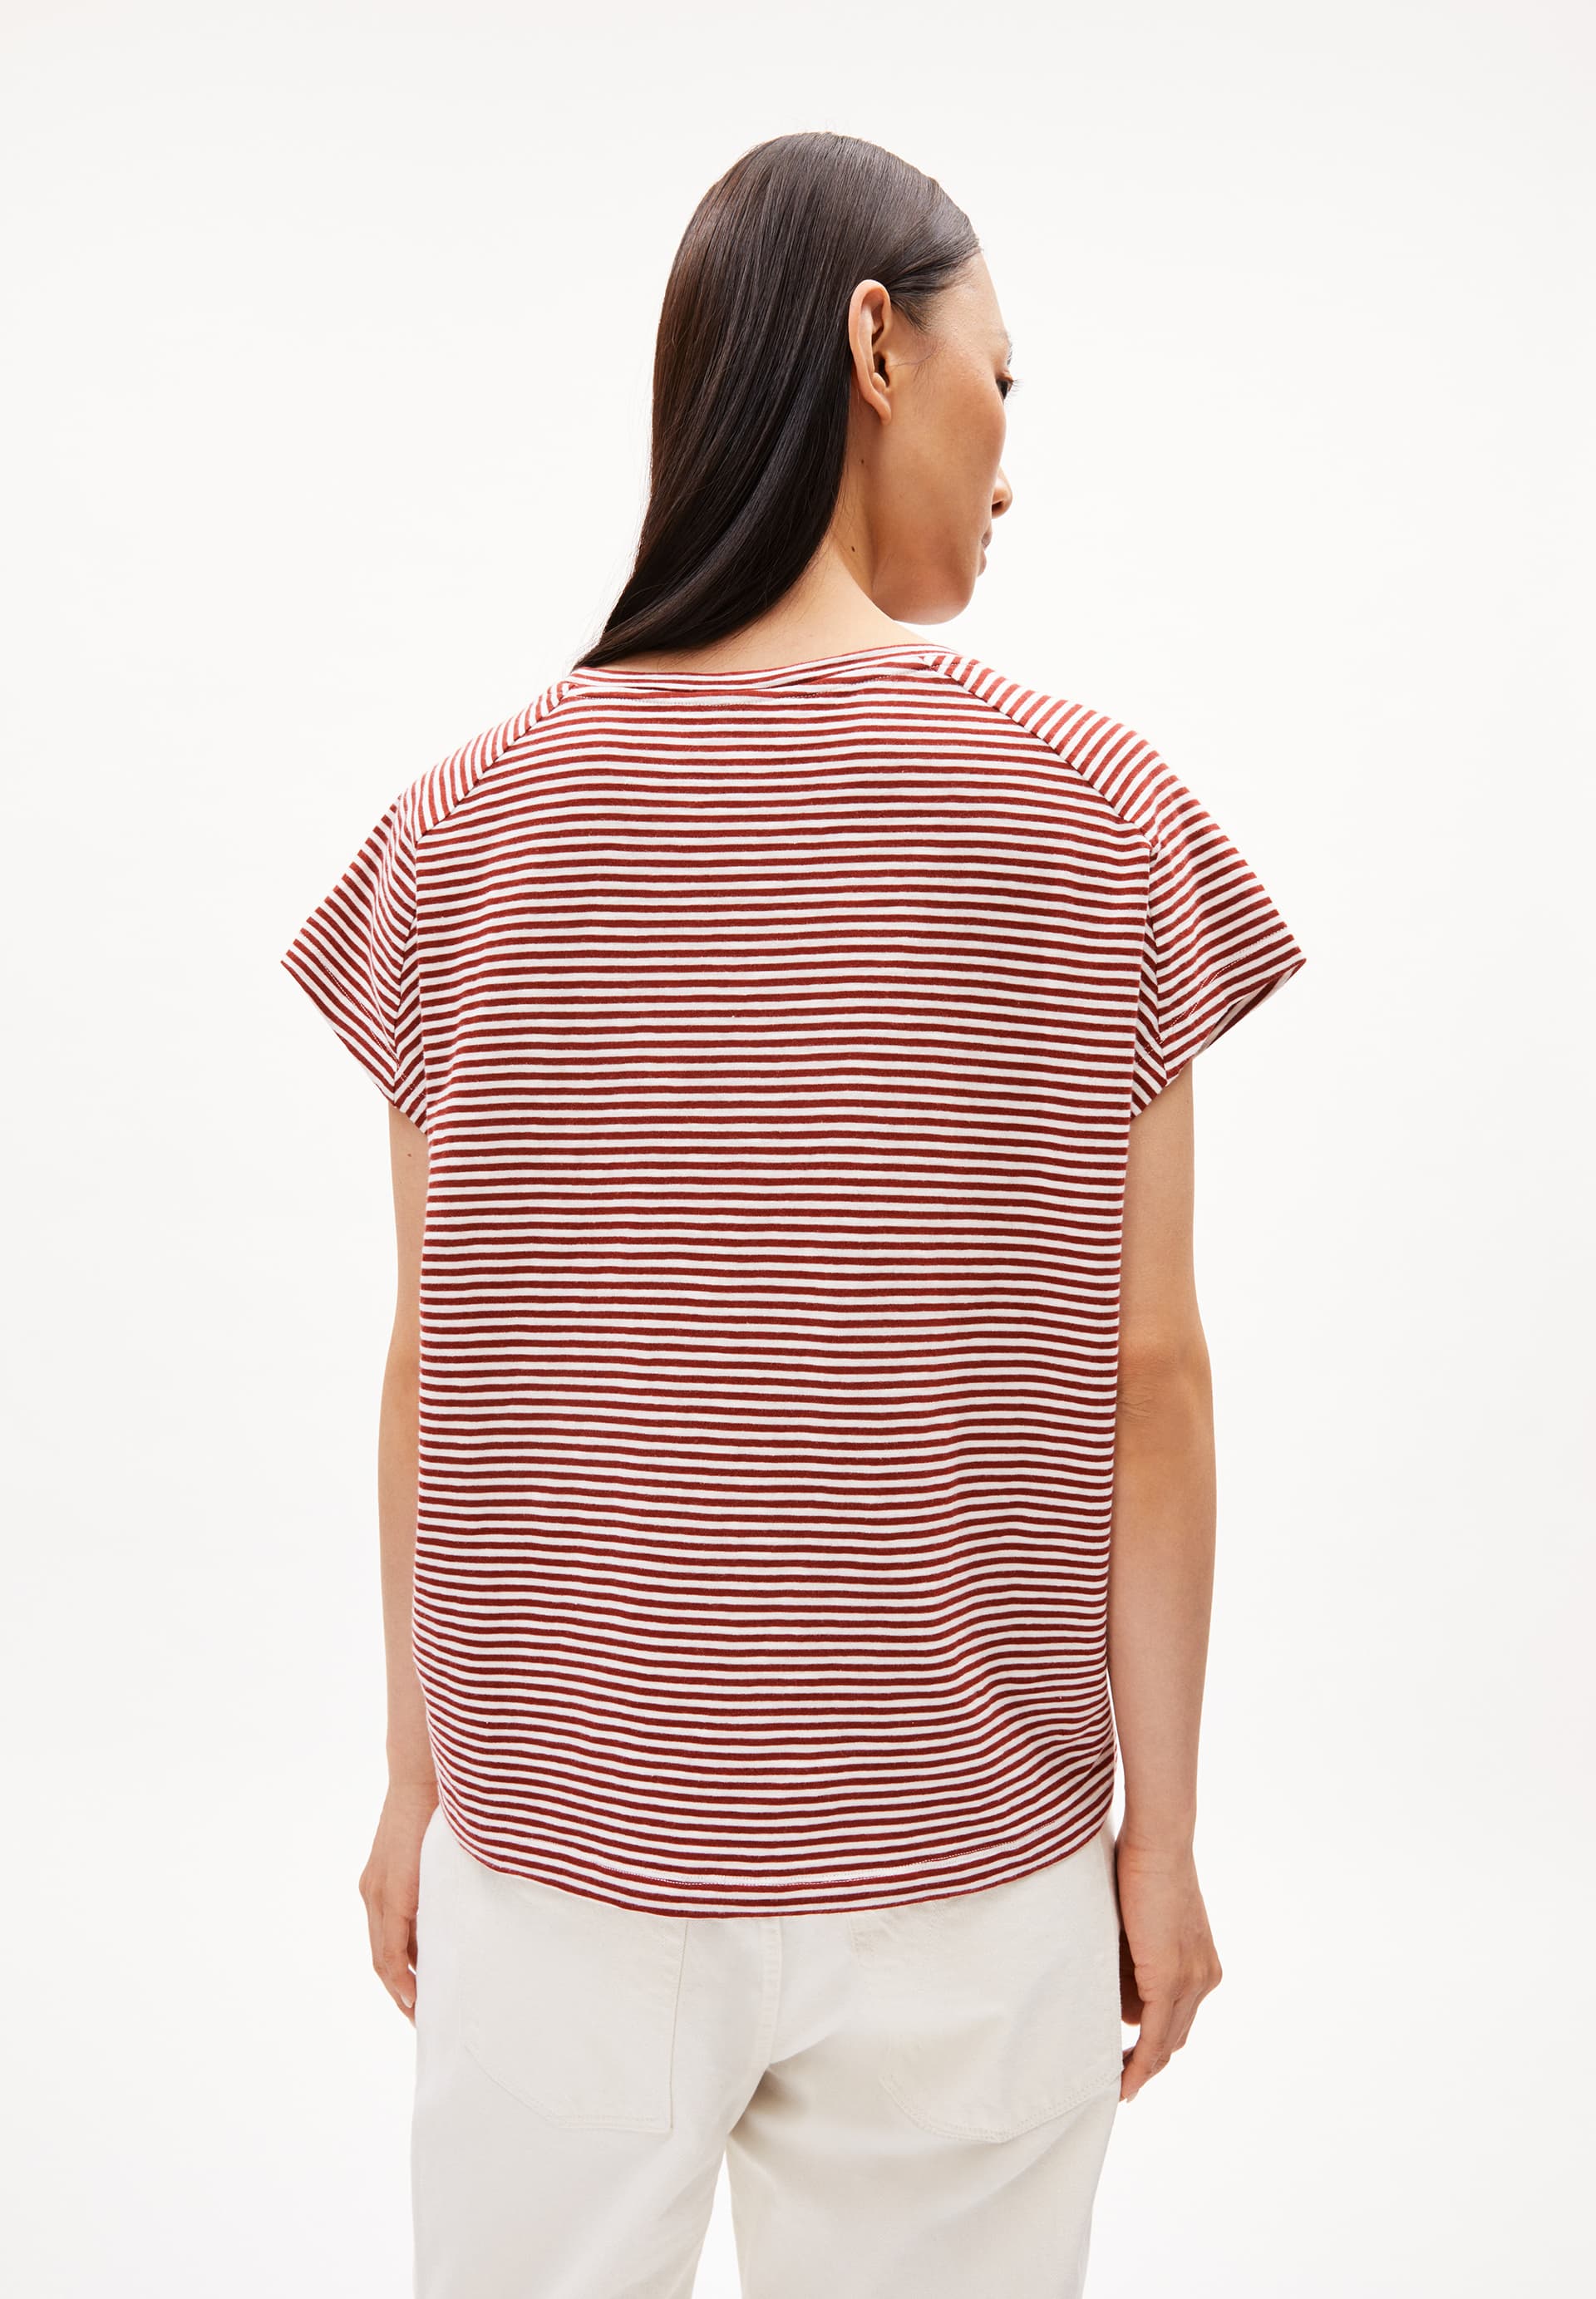 ONELIAA LOVELY STRIPES T-Shirt Loose Fit made of Organic Cotton